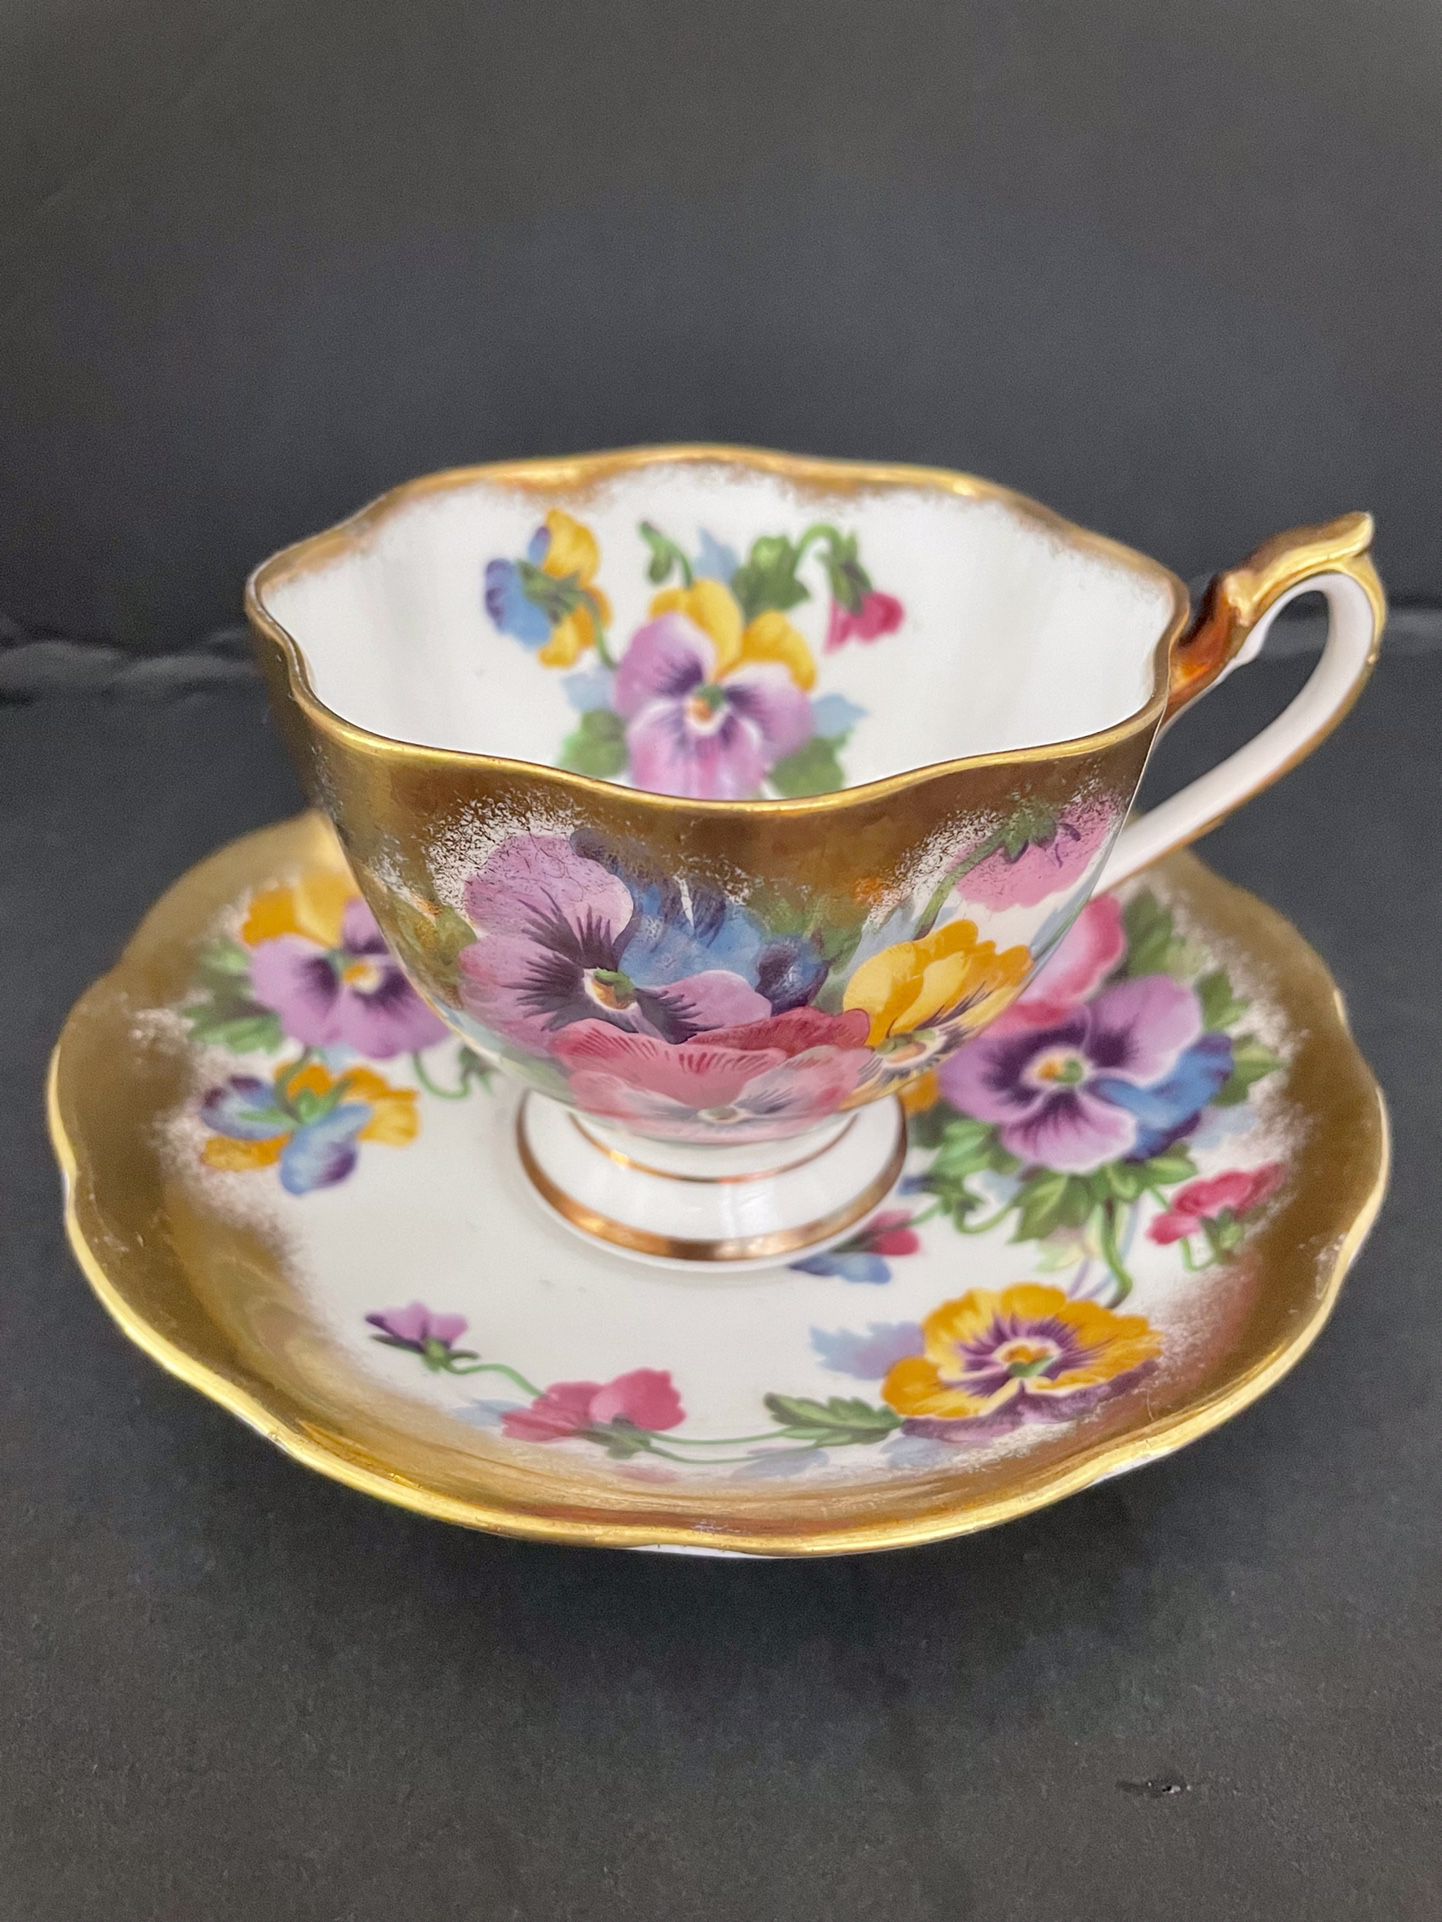 Vintage QUEEN ANNE Fine Bone China Teacup and Saucer - Pattern 5216